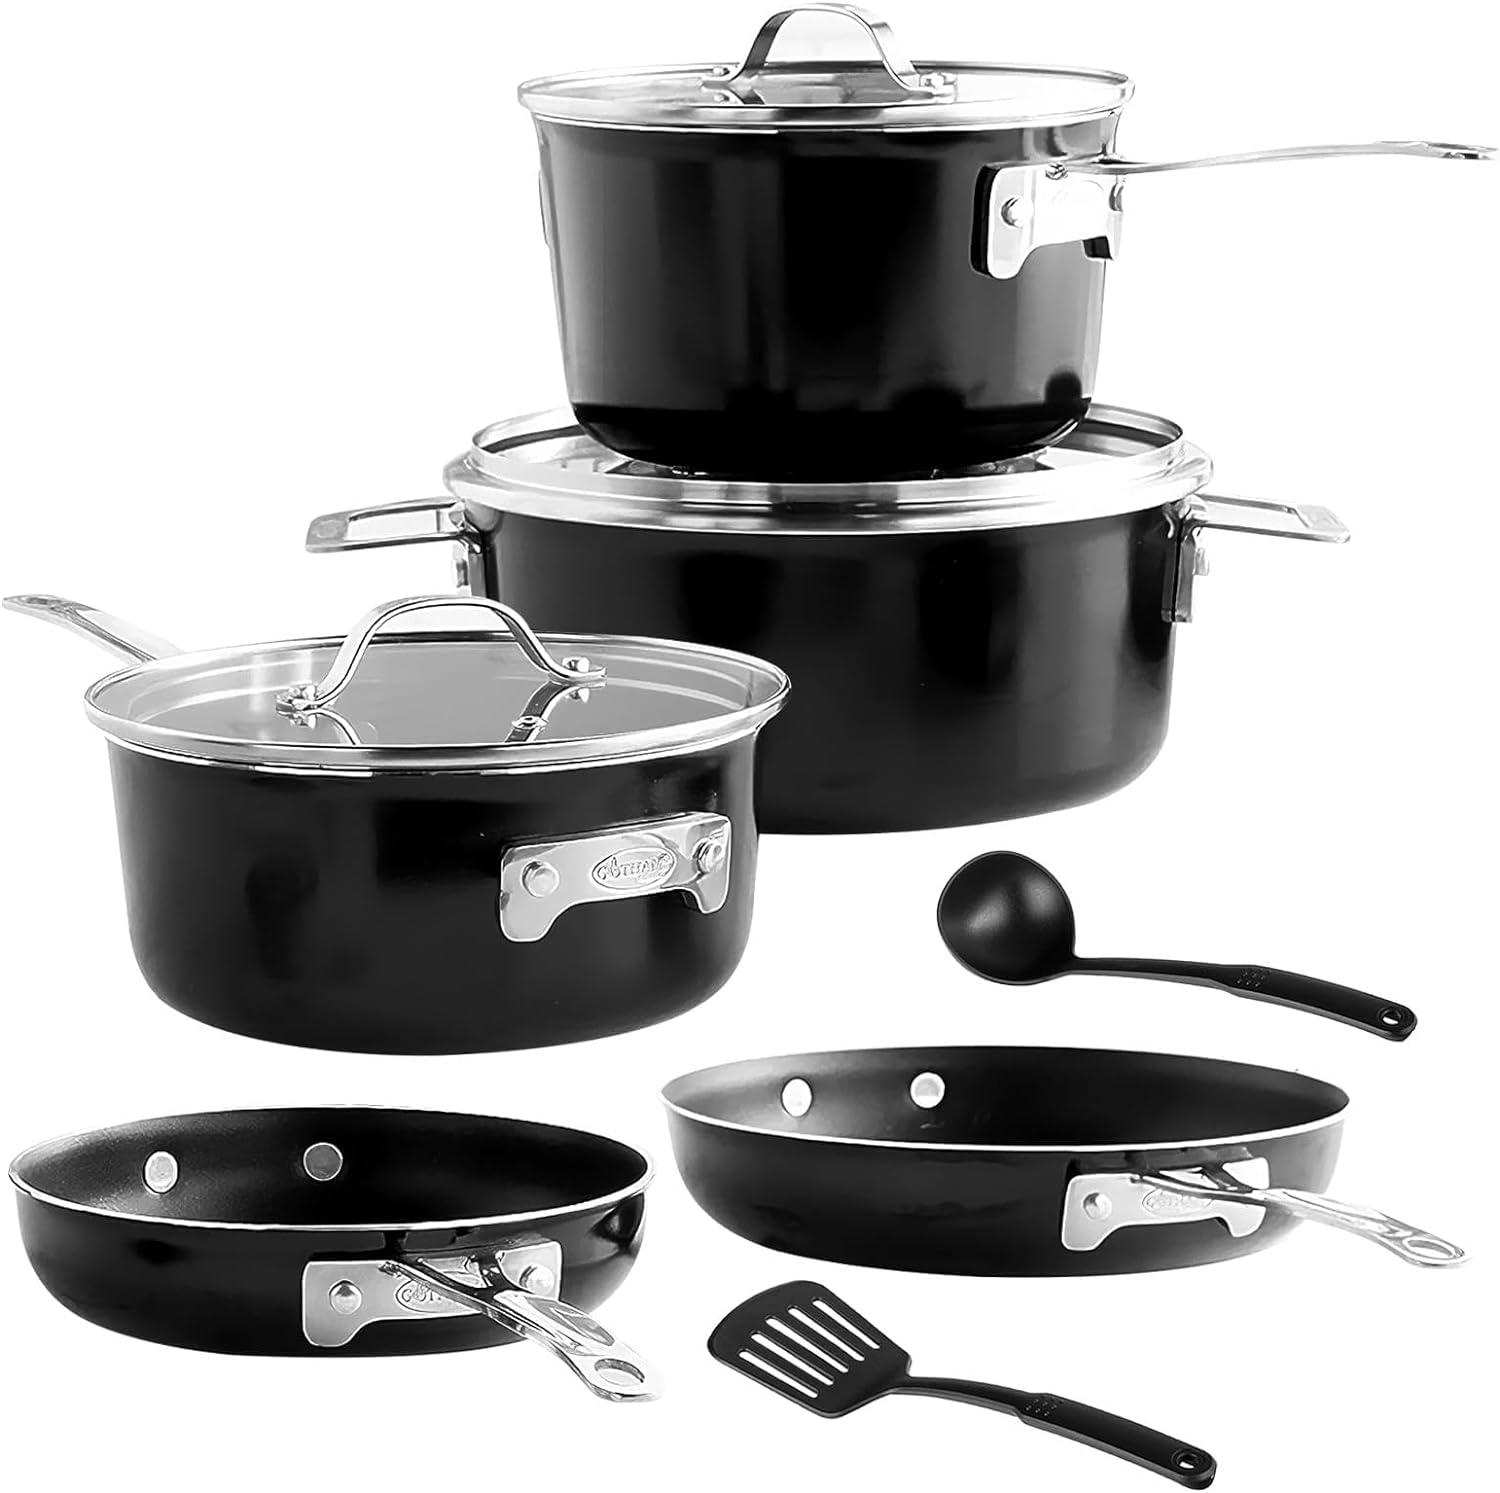 10-Piece Gotham Steel Stackmaster Pots & Pans Non-Stick Induction Cookware Set $58.95 + Free Shipping